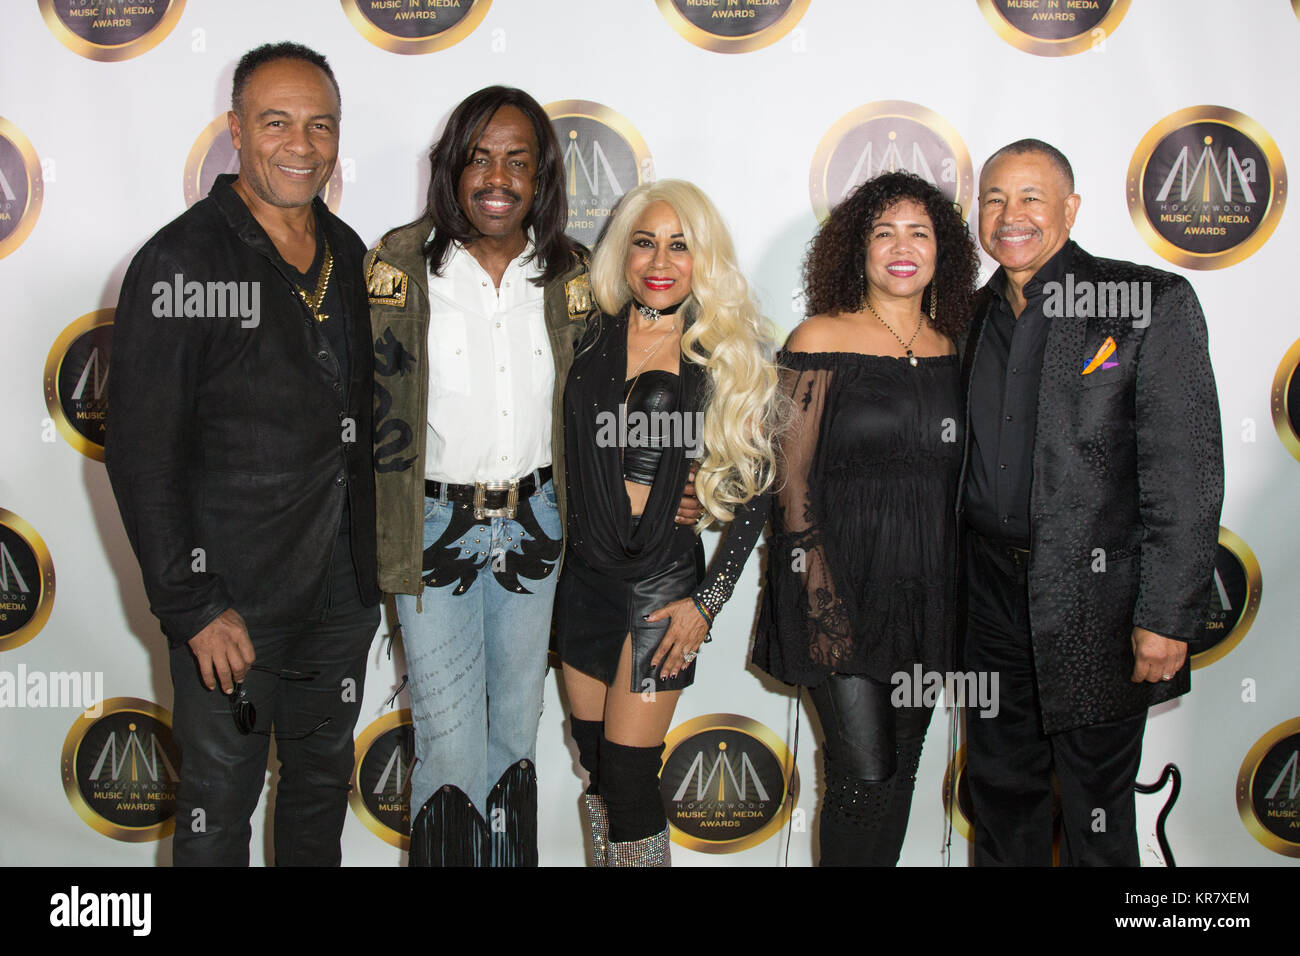 The 8th Annual Hollywood Music in Media Awards - Arrivals Featuring: Ray  Parker, Jr., Verdine White, Shelly Clark, Susie Johnson, Ralph Johnson  Where: Los Angeles, California, United States When: 17 Nov 2017